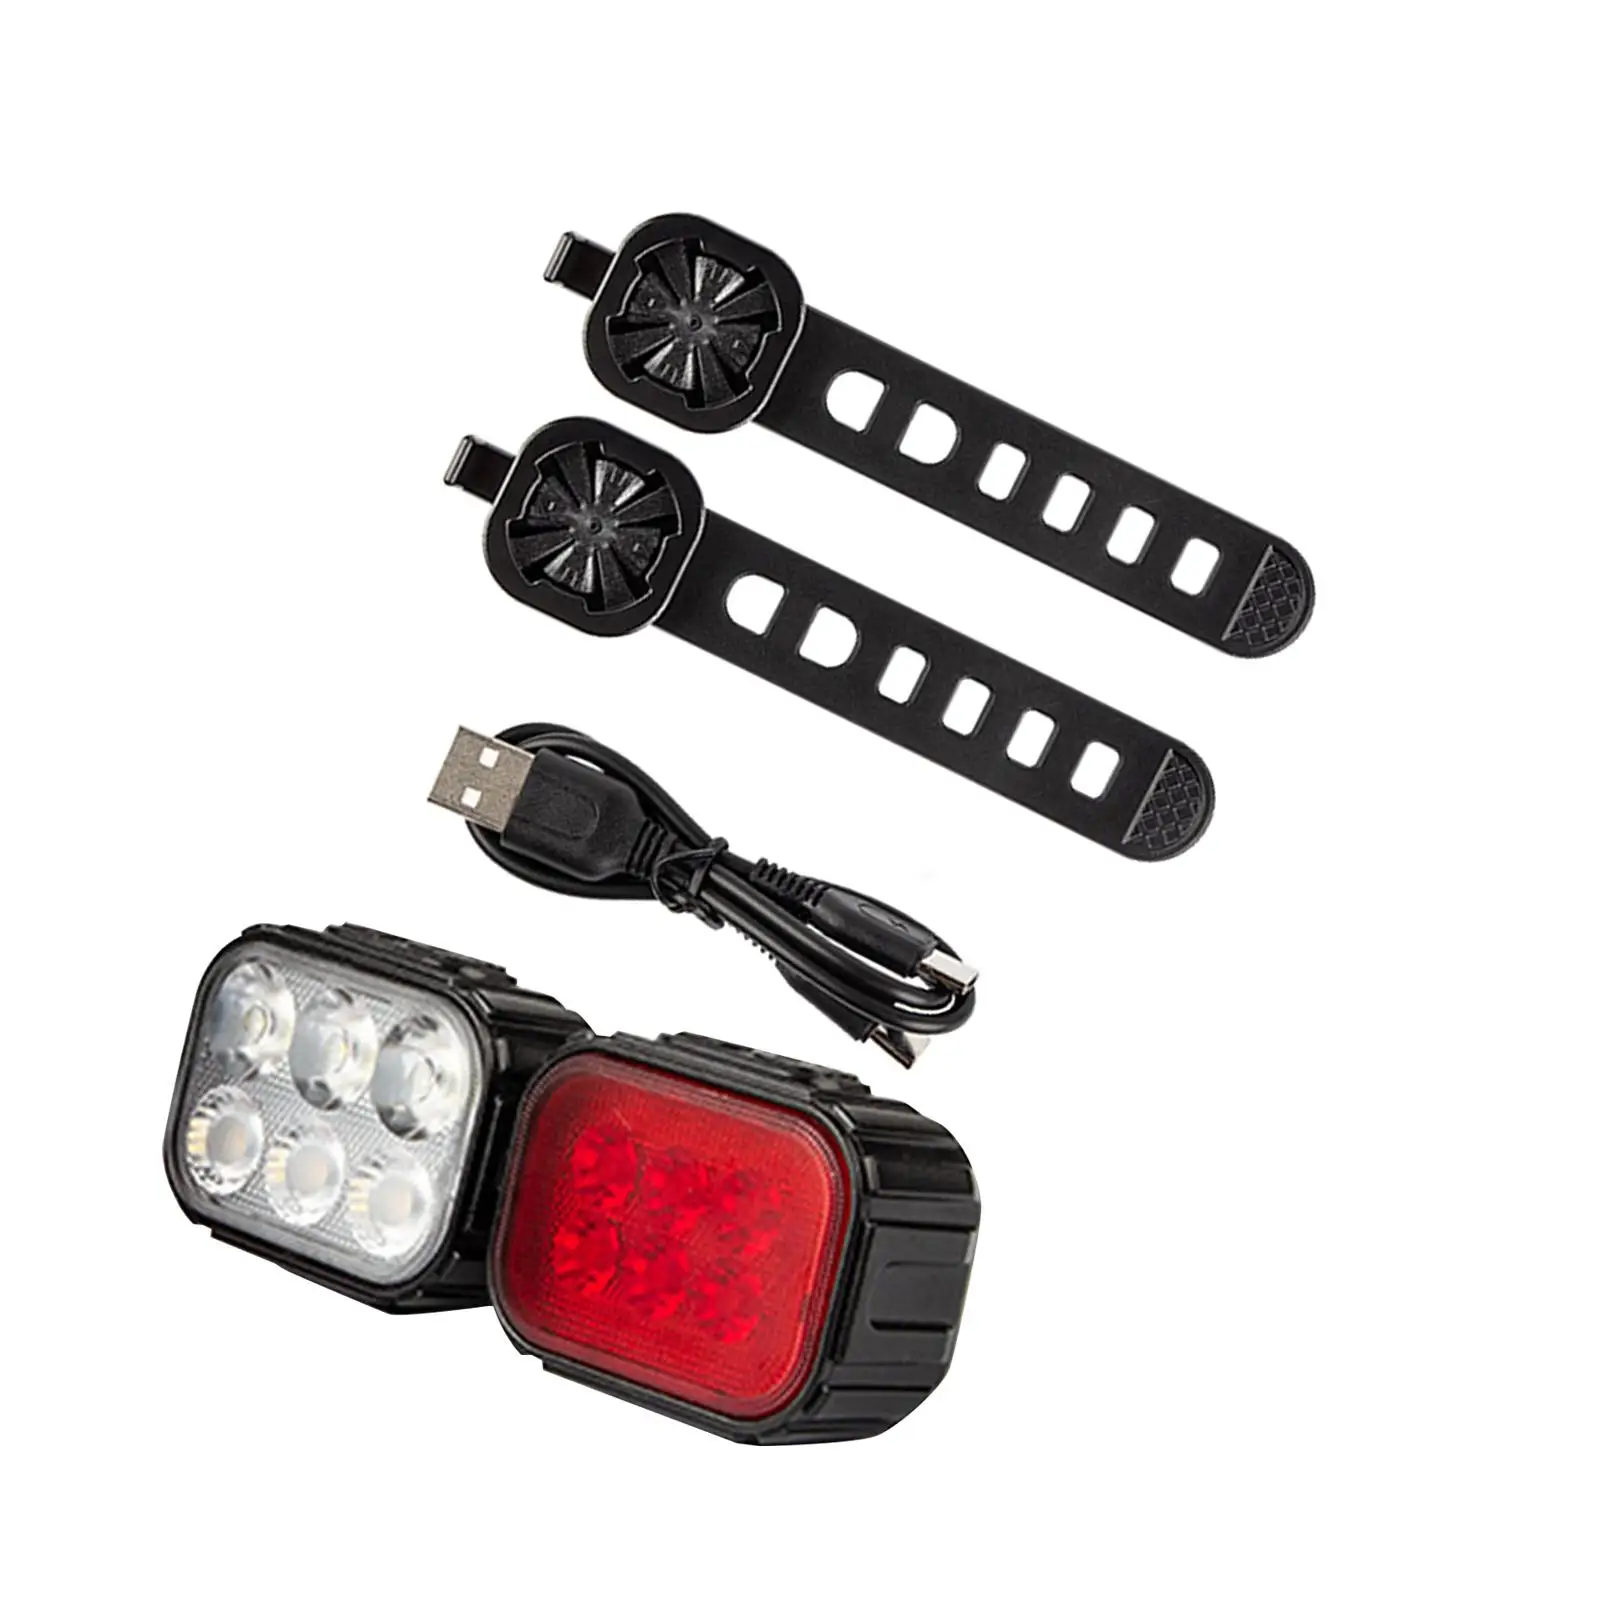 Lights Set Bike Headlight Taillight Front and Tail Light Rechargeable Waterproof Cycling for Mountain Bike LED Lamp